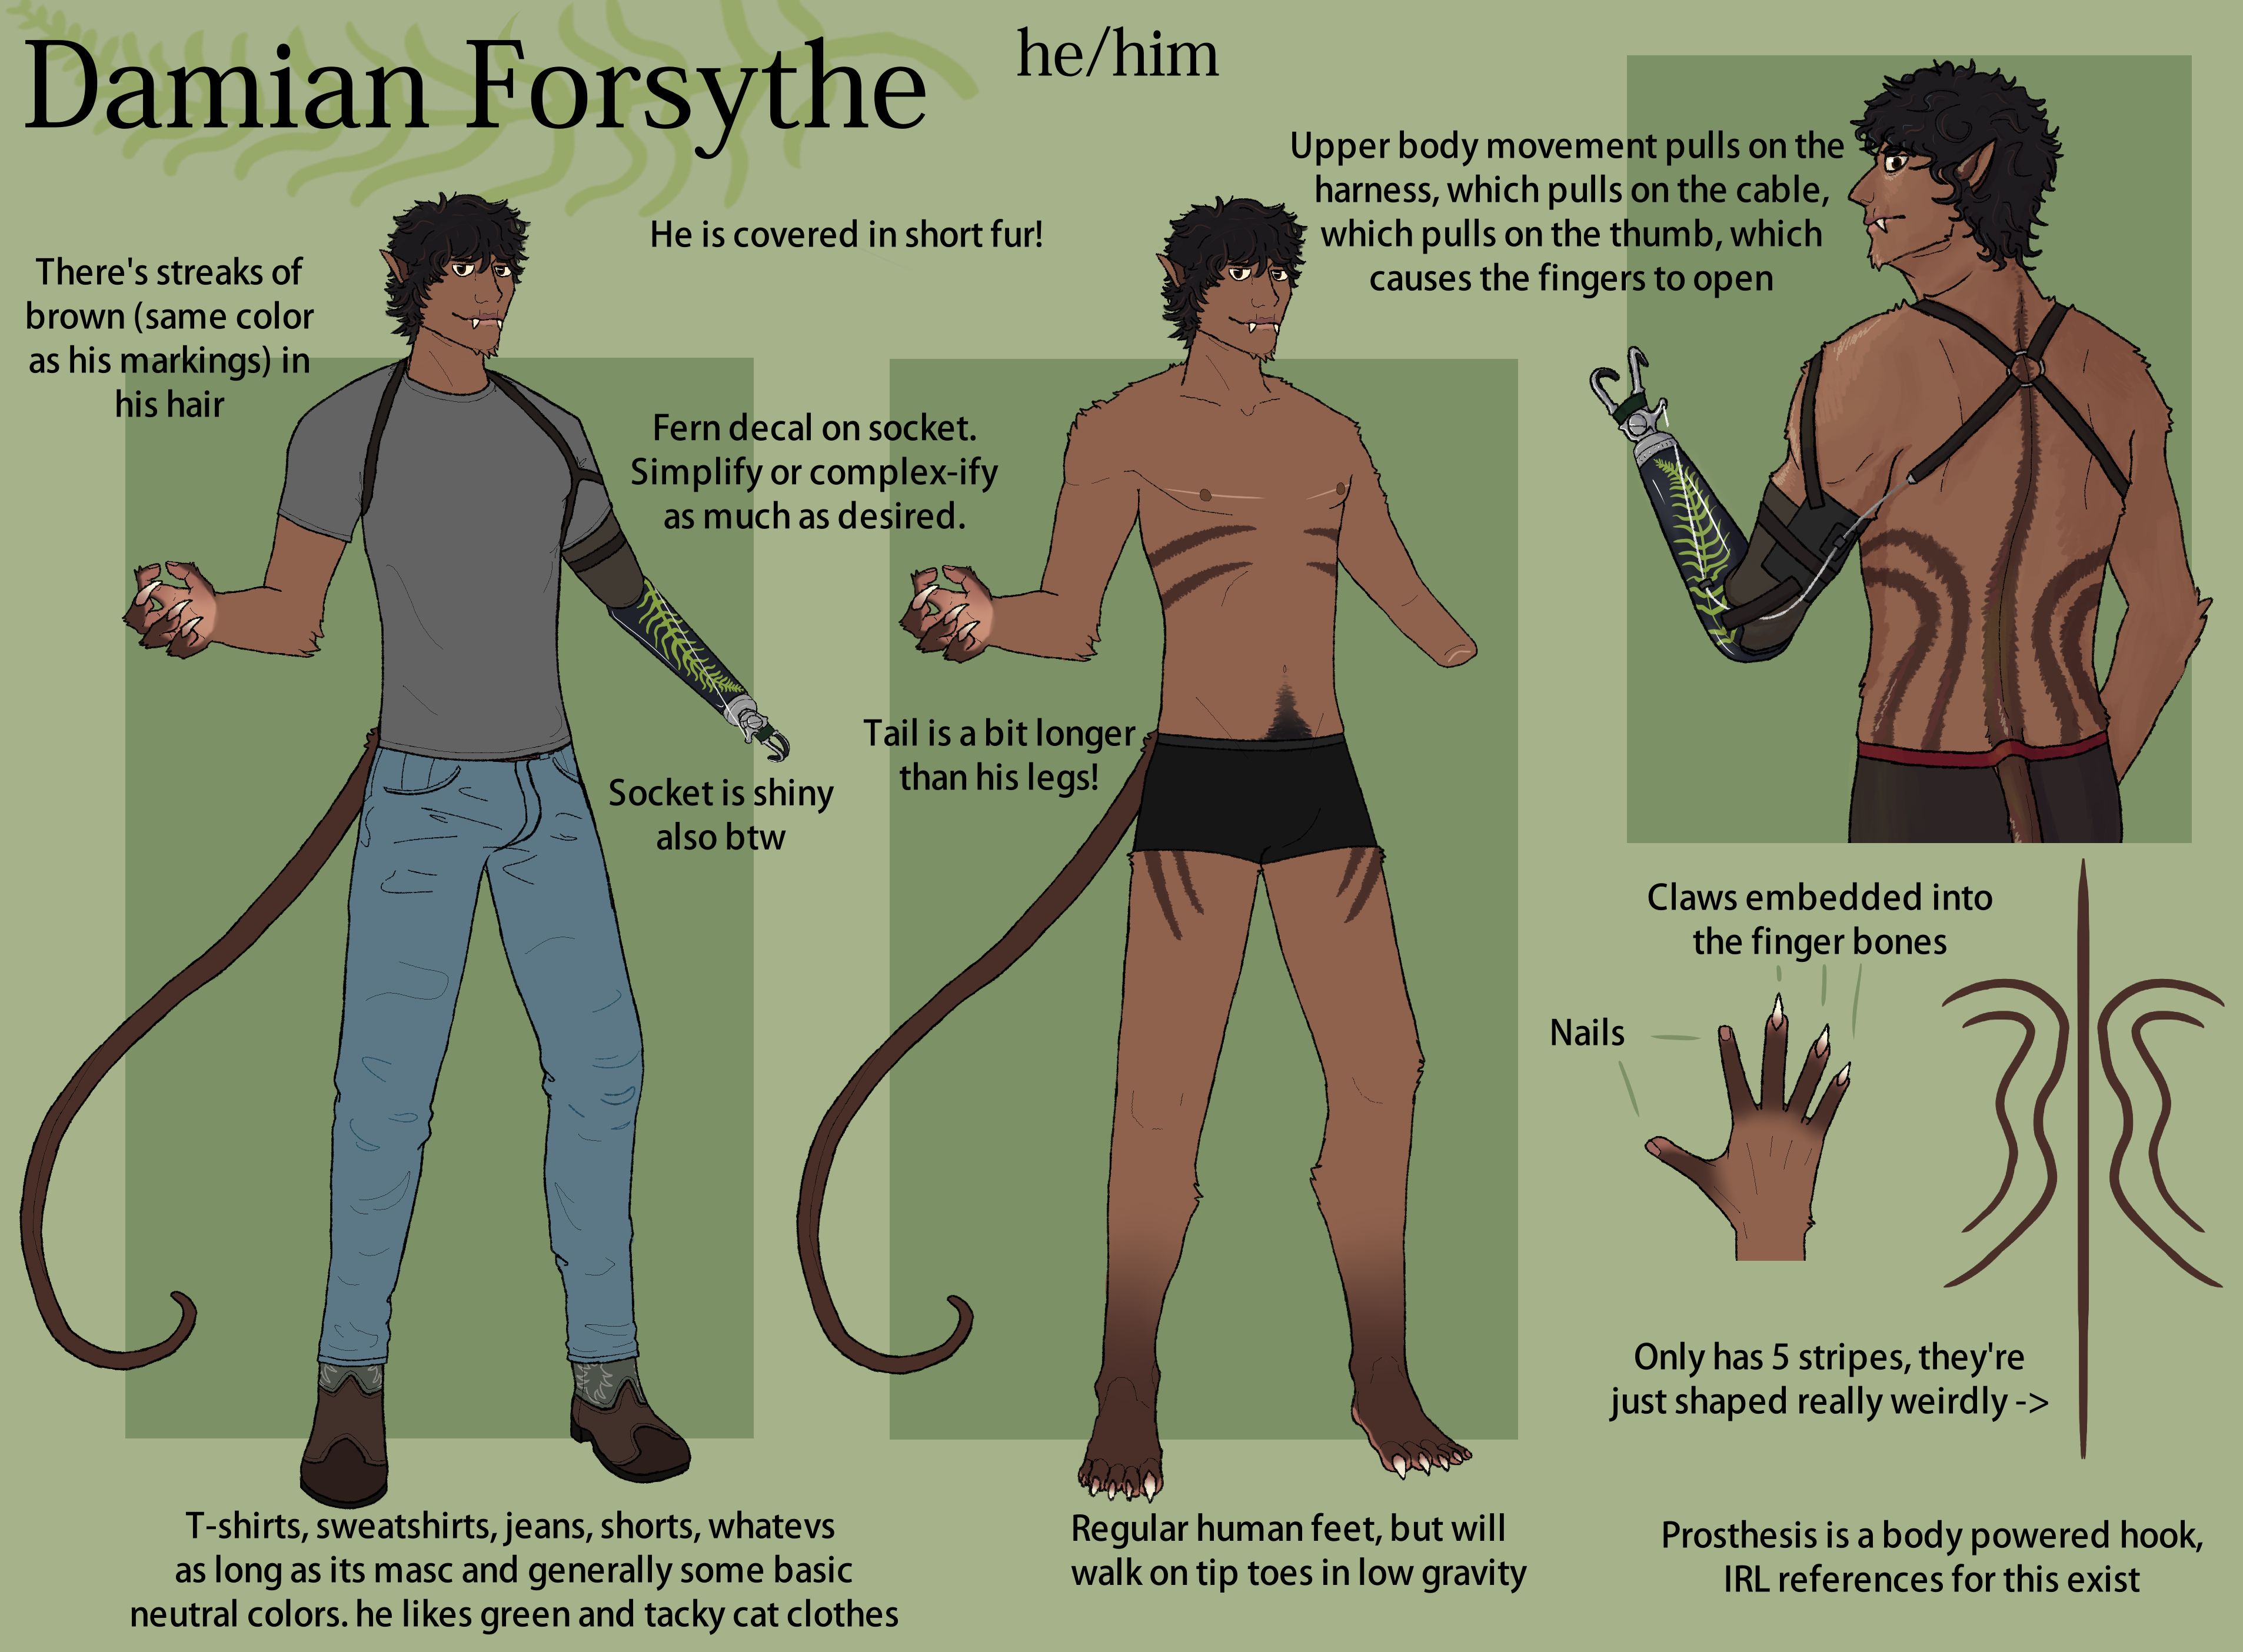 Damian Forsythe is a furry human with cat-like traits. His skin is brown and his hair is black. He wears a gray t-shirt with jeans. His left arm is missing, he is using a prosthetic hook.